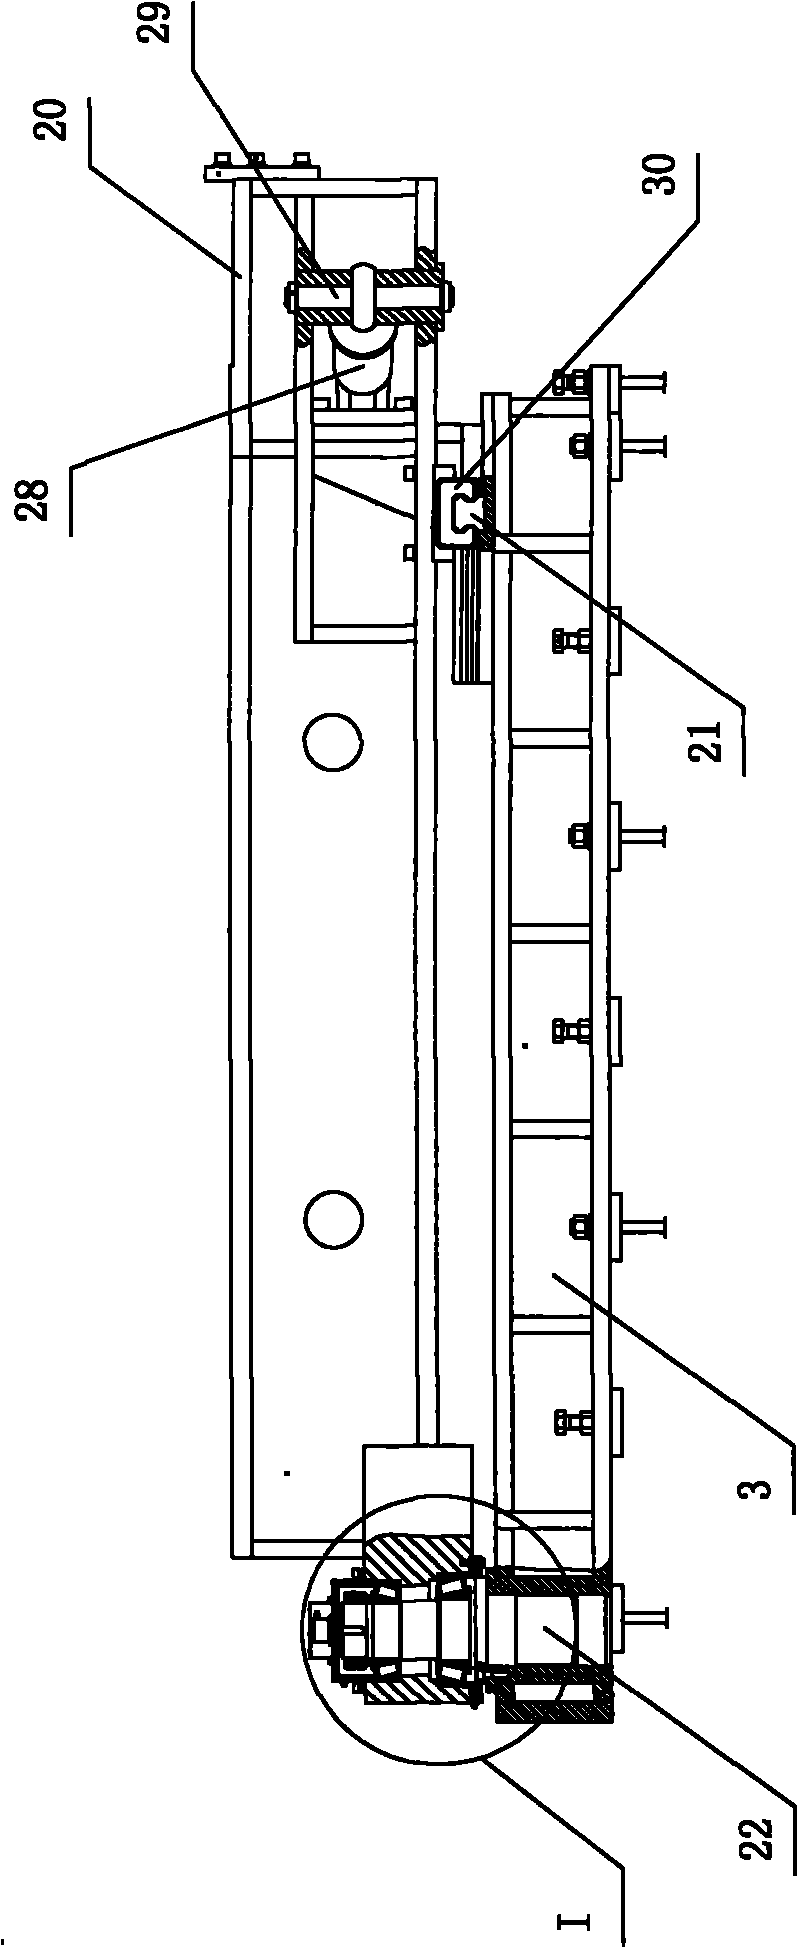 Inclination detection device and method for tire durability